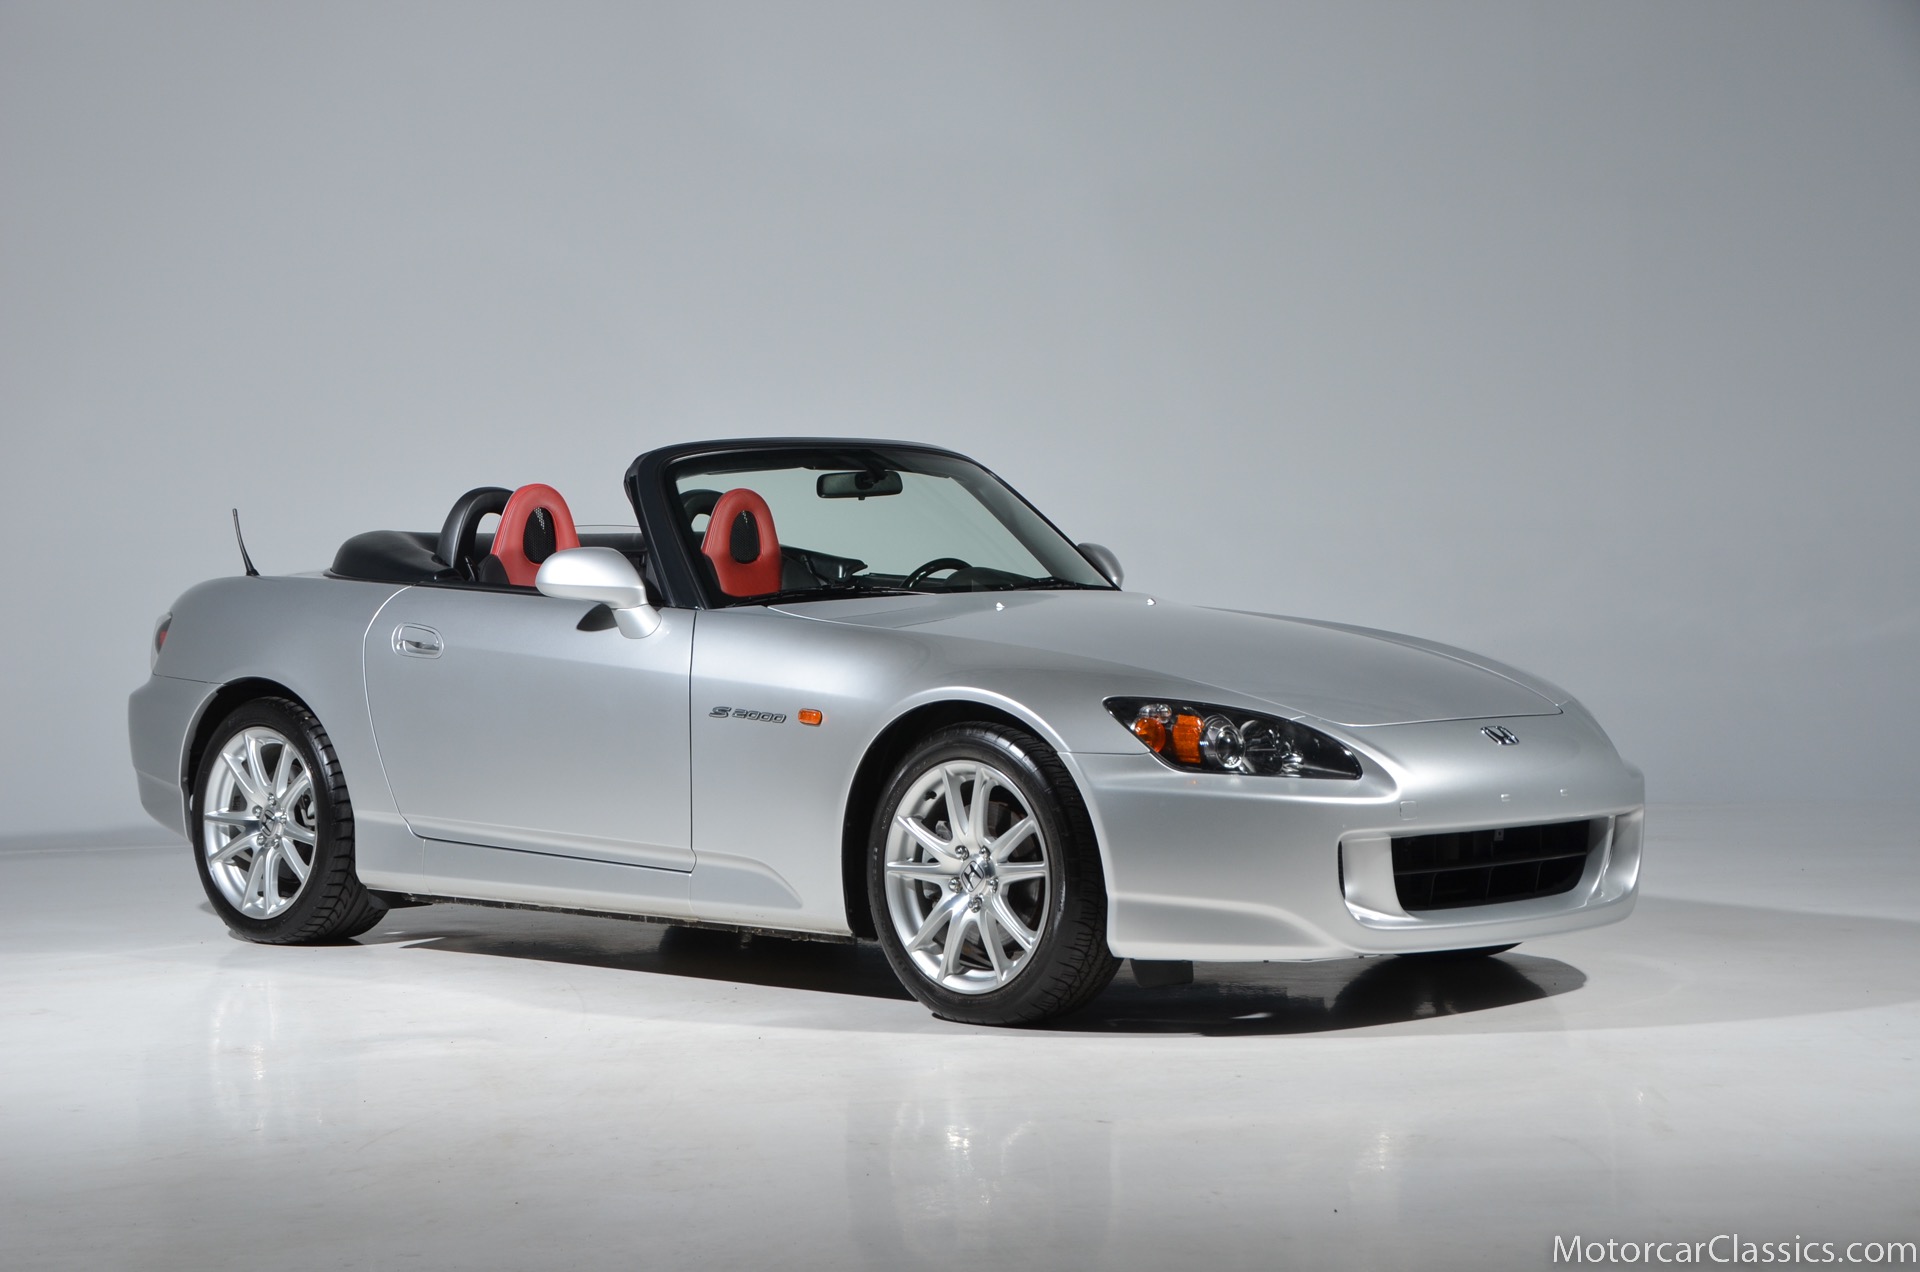 2005 Honda S2000 For Sale | Vintage Driving Machines